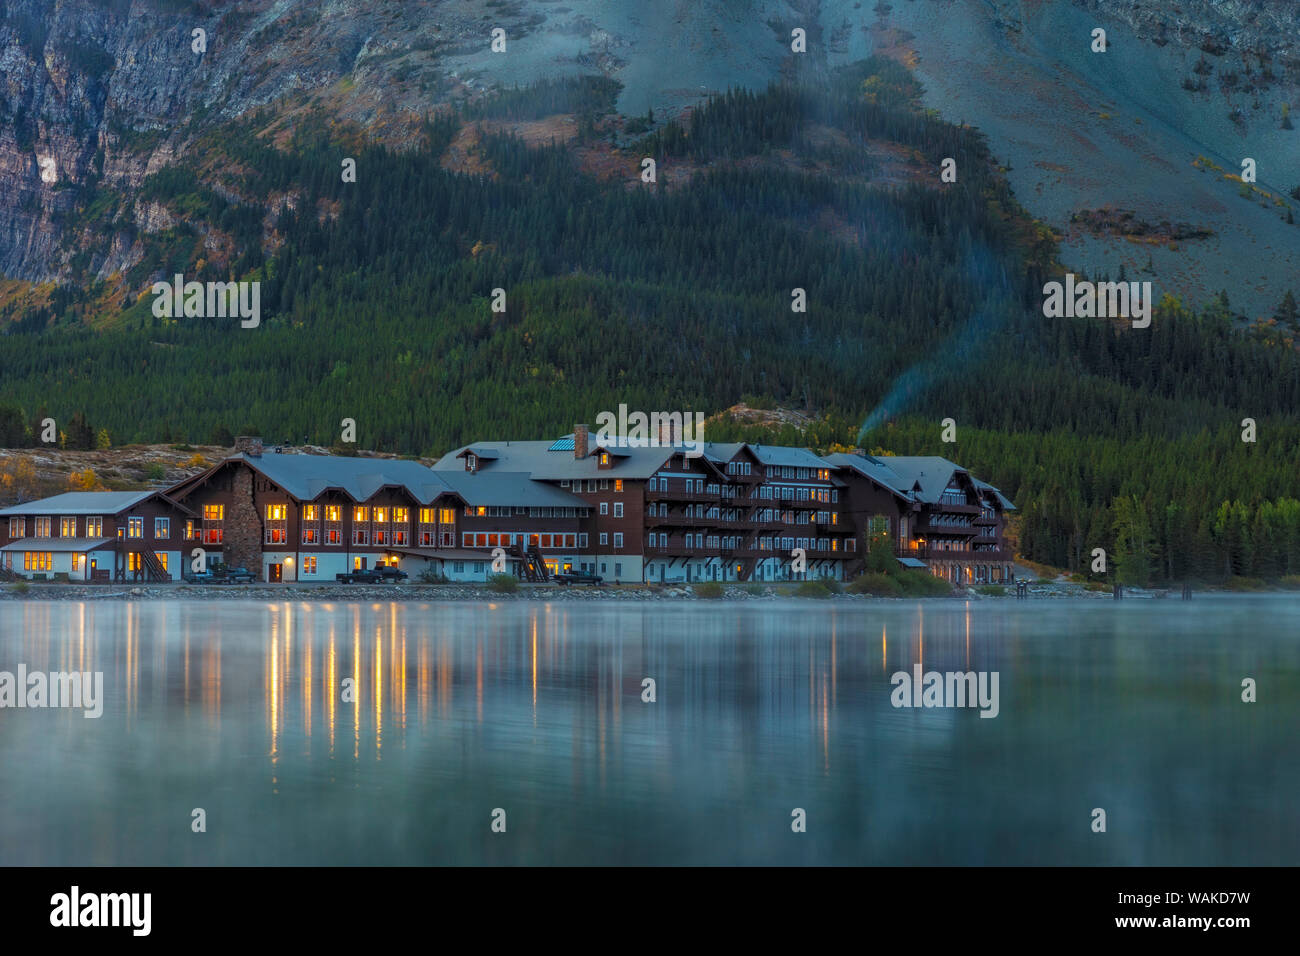 Many Glacier Lodge reflects into Swift current Lake at dawn in Glacier National Park, Montana, USA Stock Photo